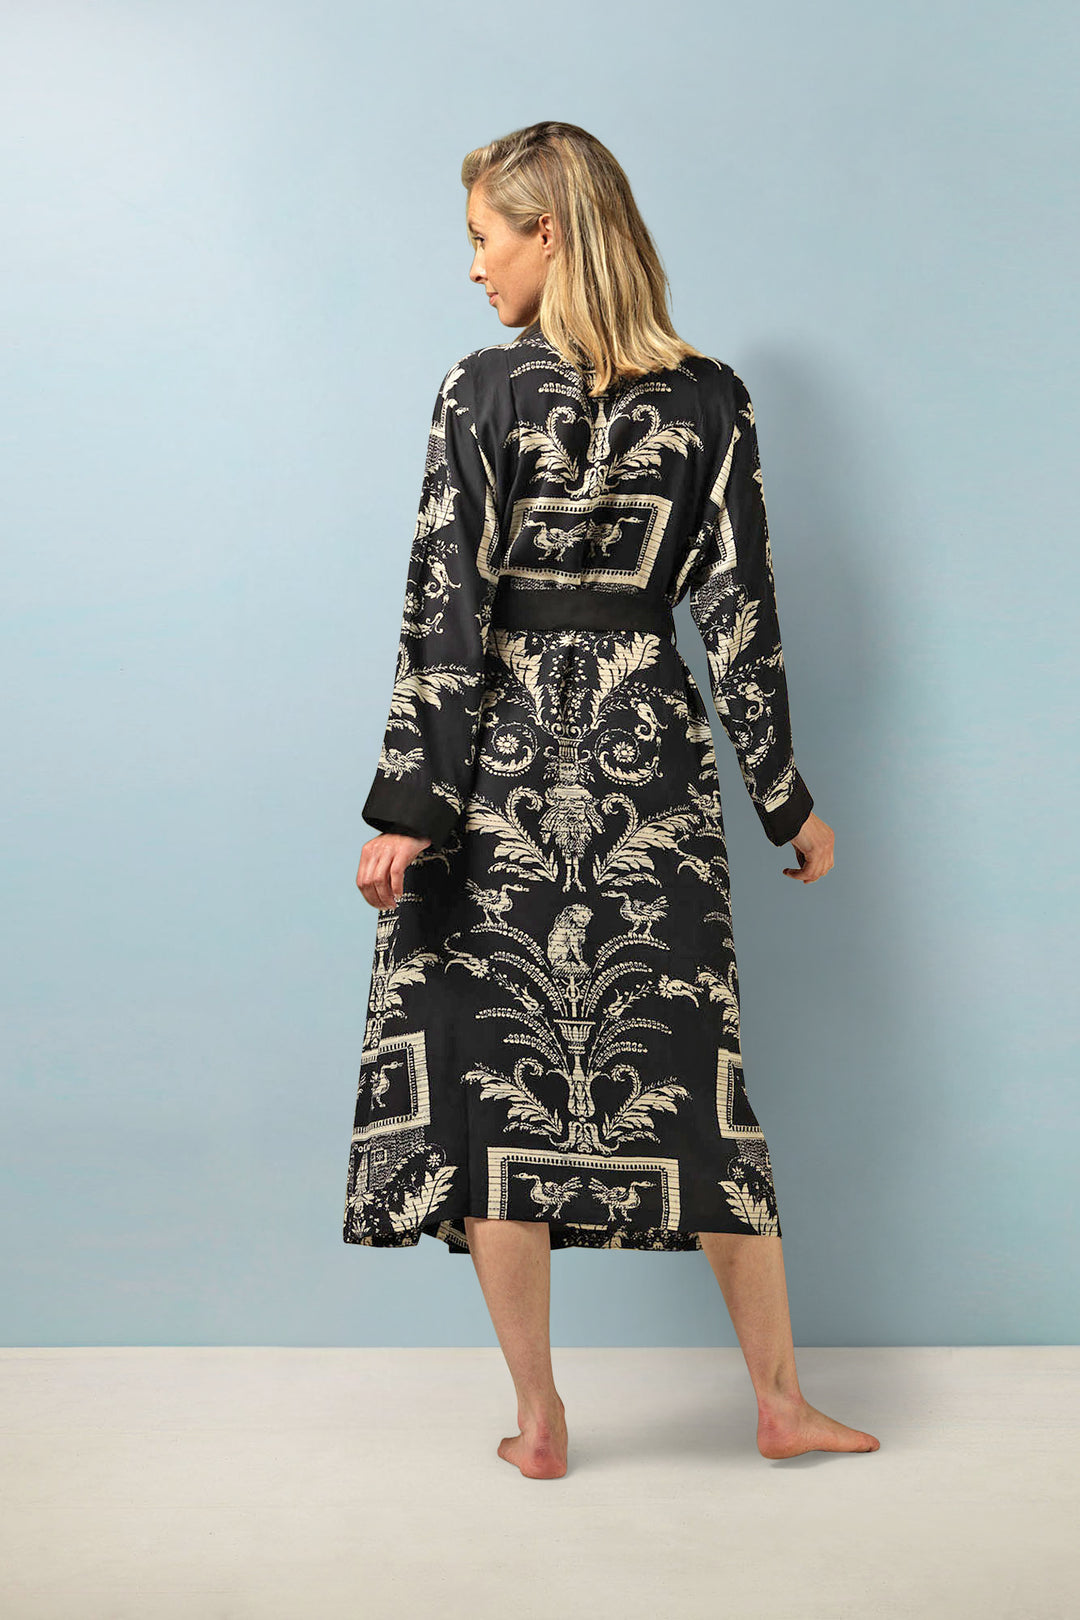 ladies crepe luxury dressing gown belted long sleeve in black and white vintage damask print by One Hundred Stars